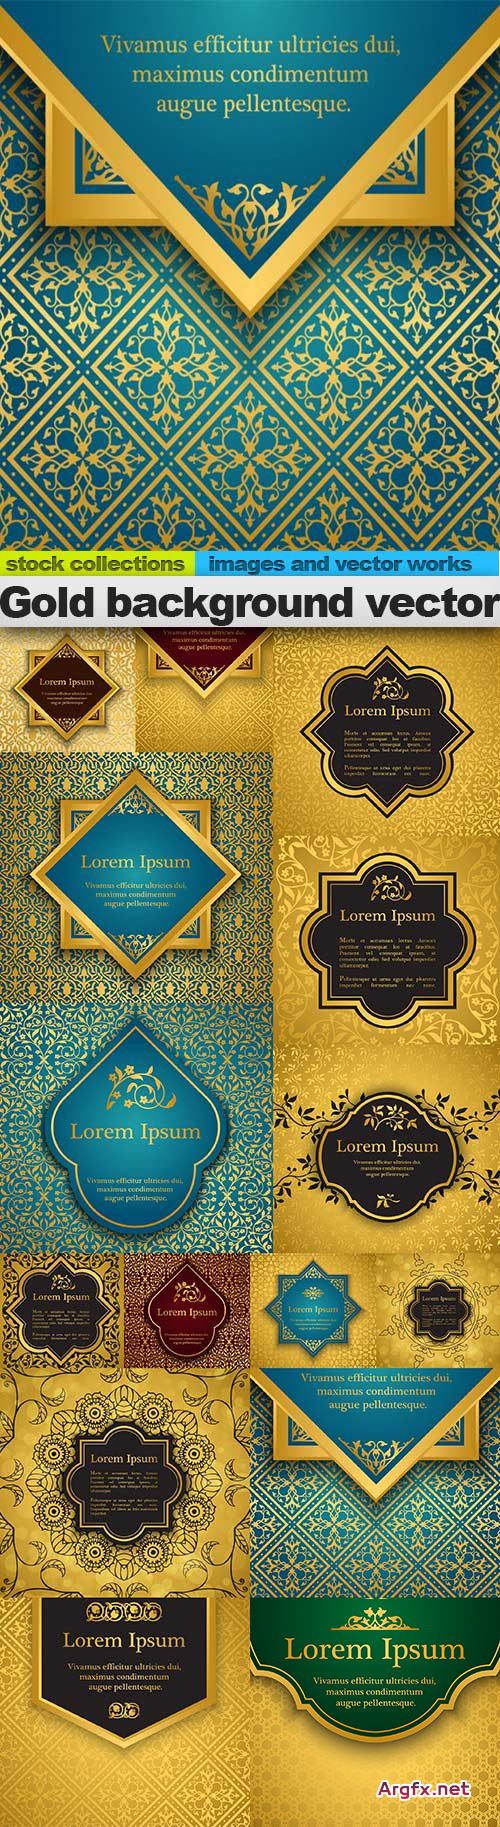  Gold background vector, 15 x EPS